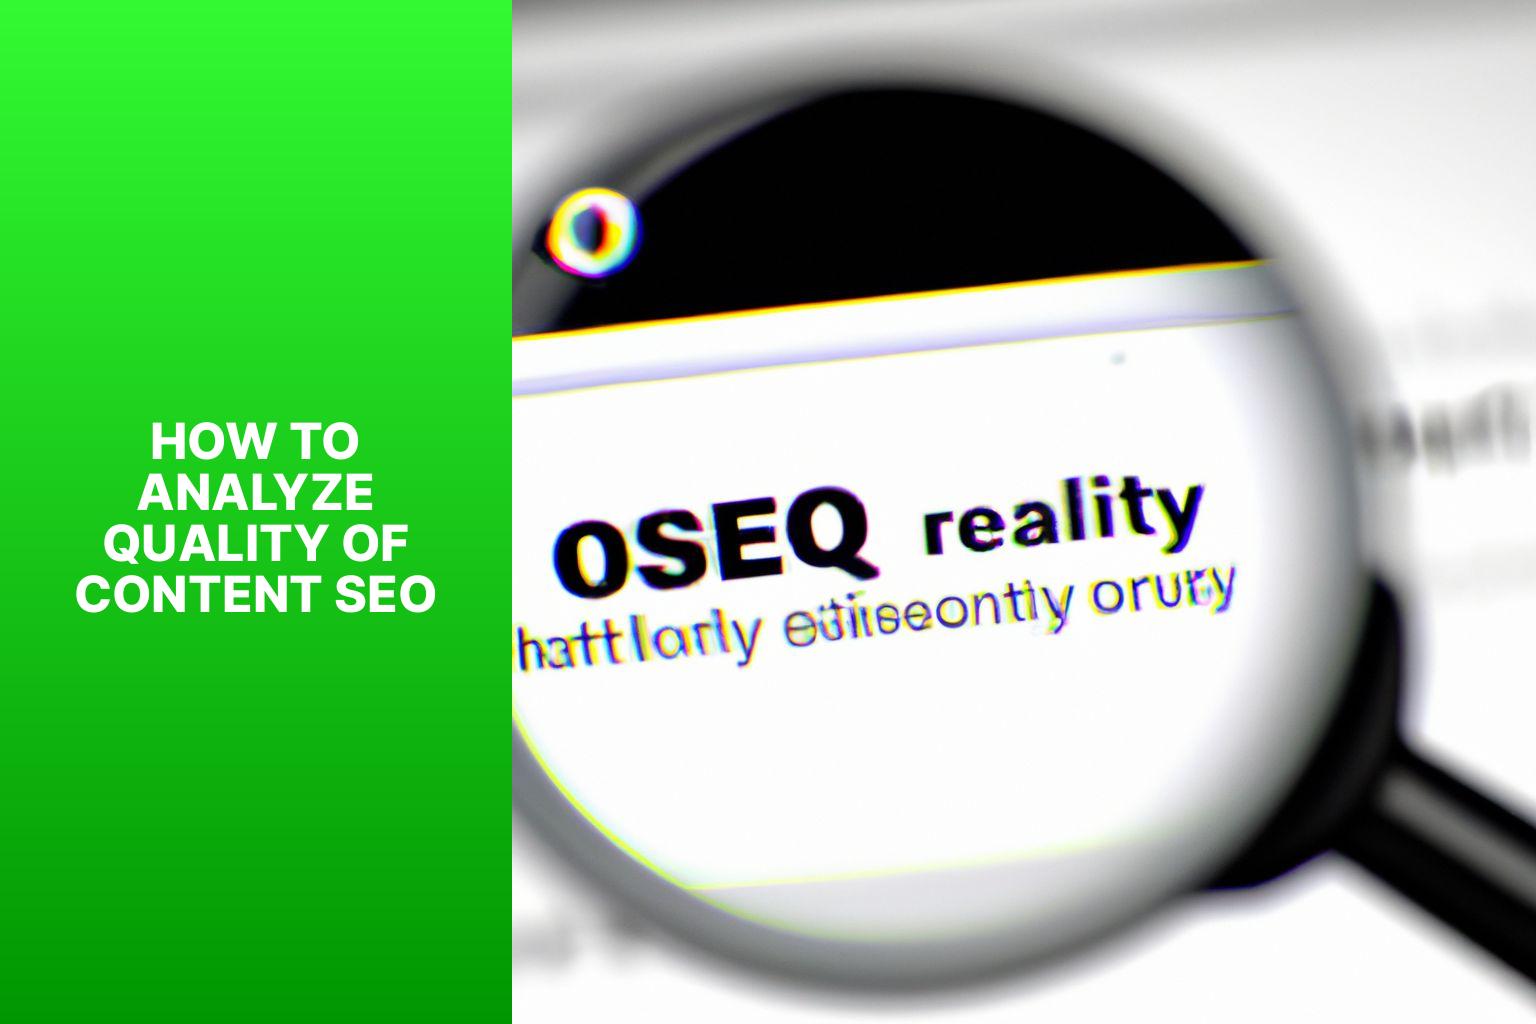 How to Analyze Quality of Content SEO